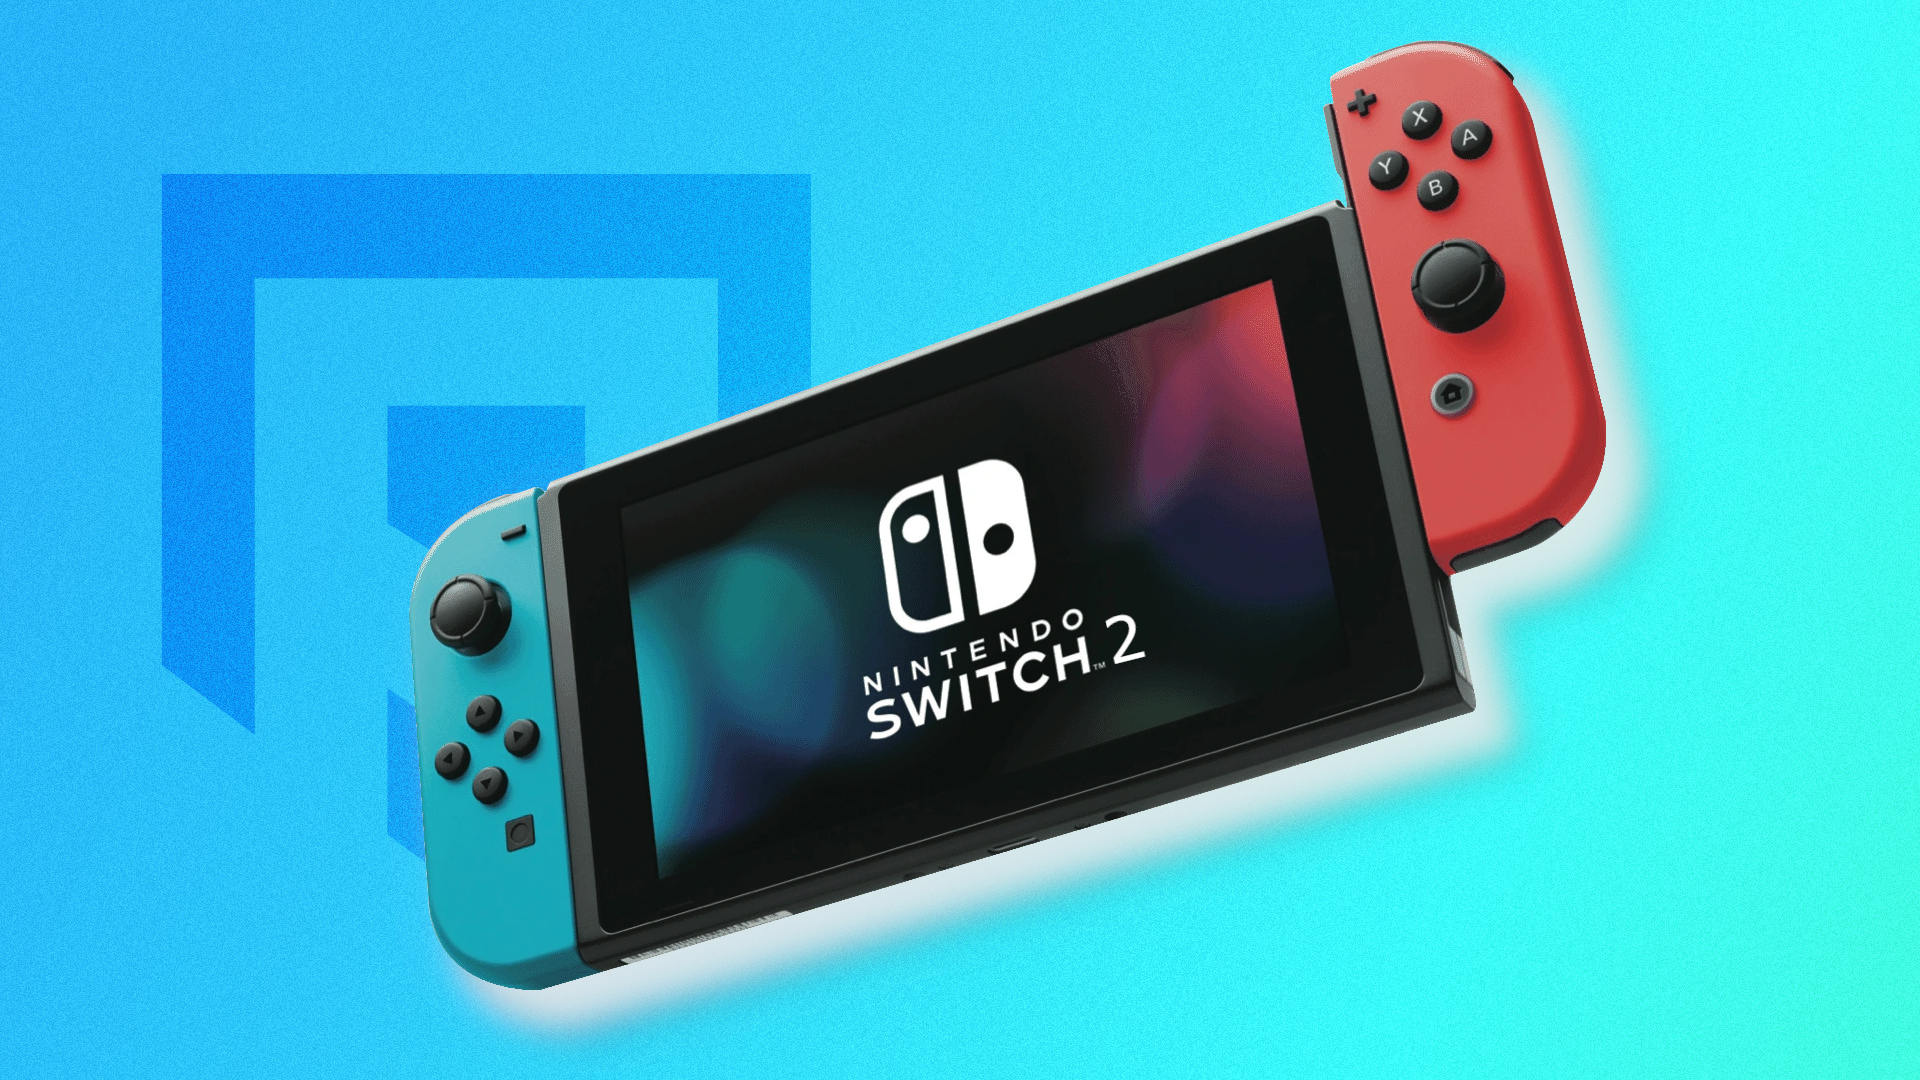 Nintendo Switch 2: Rumors and everything we know about the next console